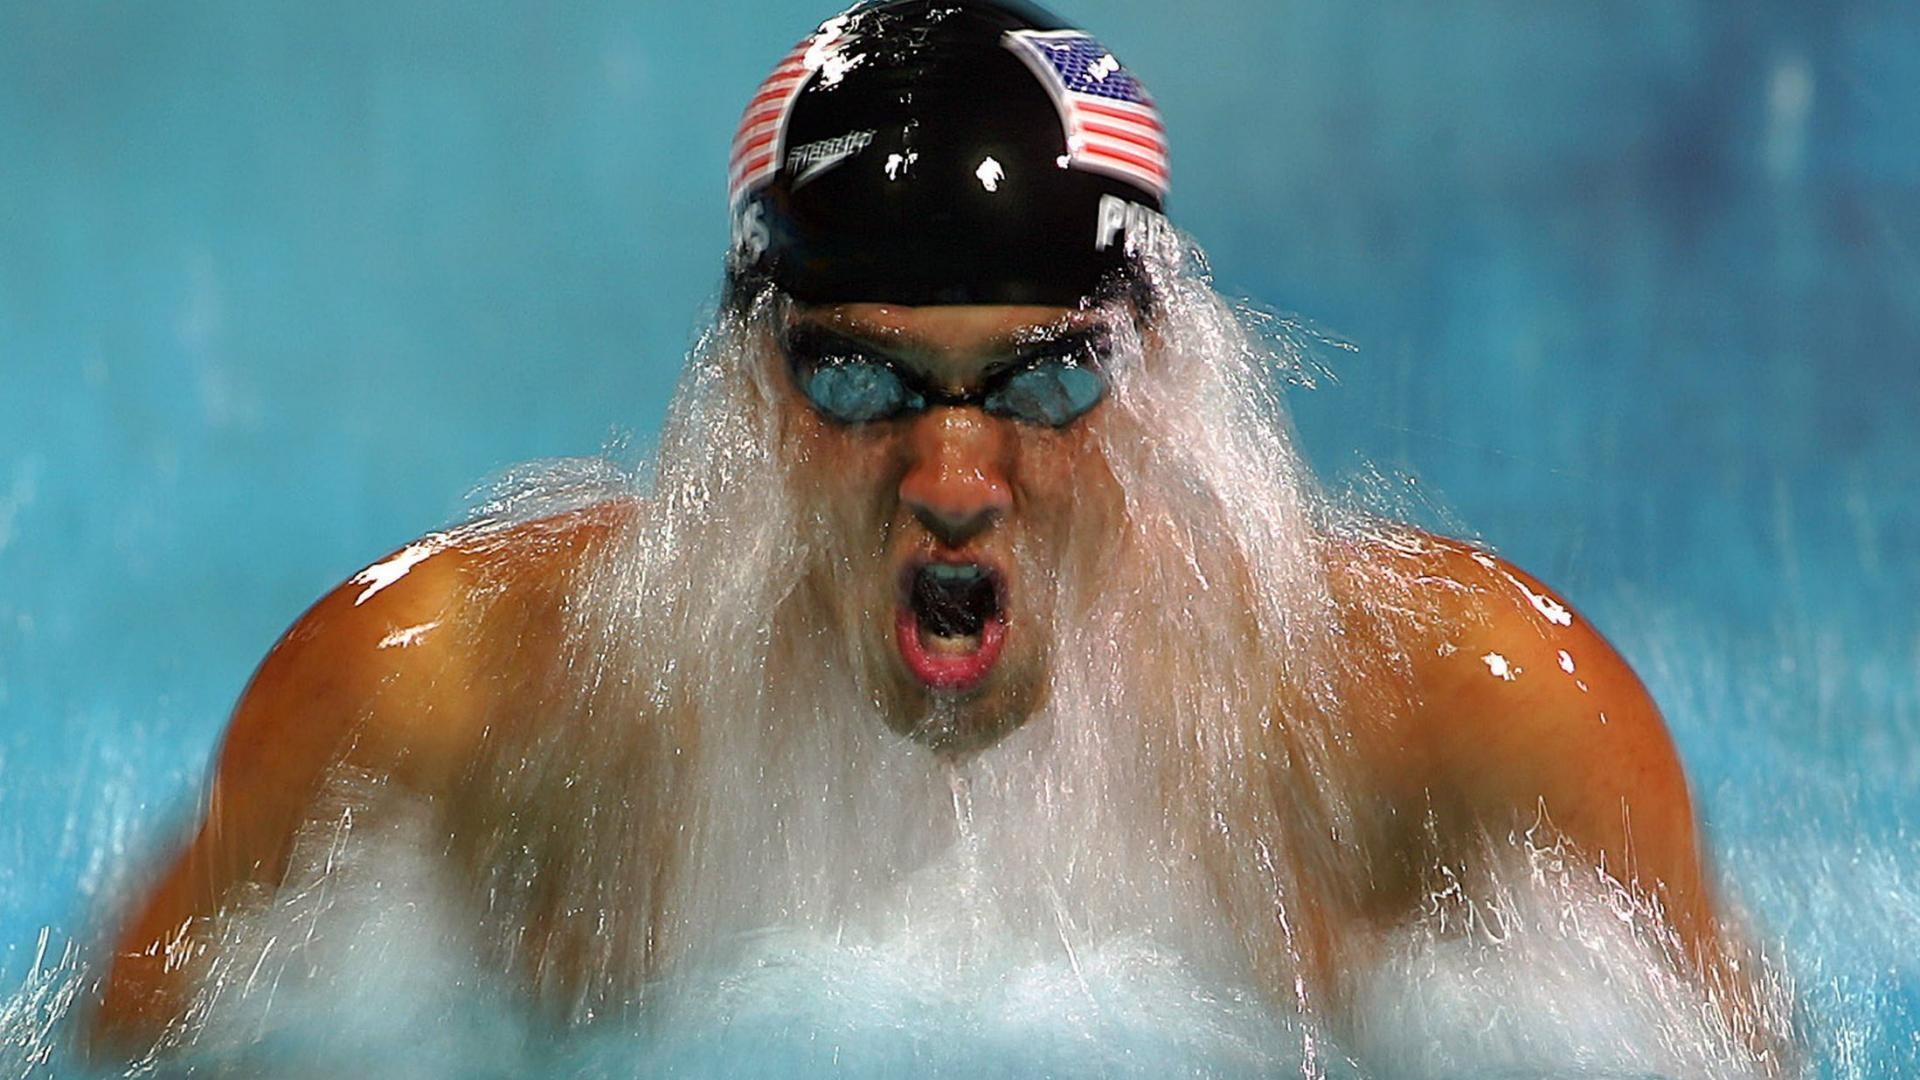 http://www.recordclick.com/wp-content/uploads/2014/11/Michael-Phelps-02.jpg